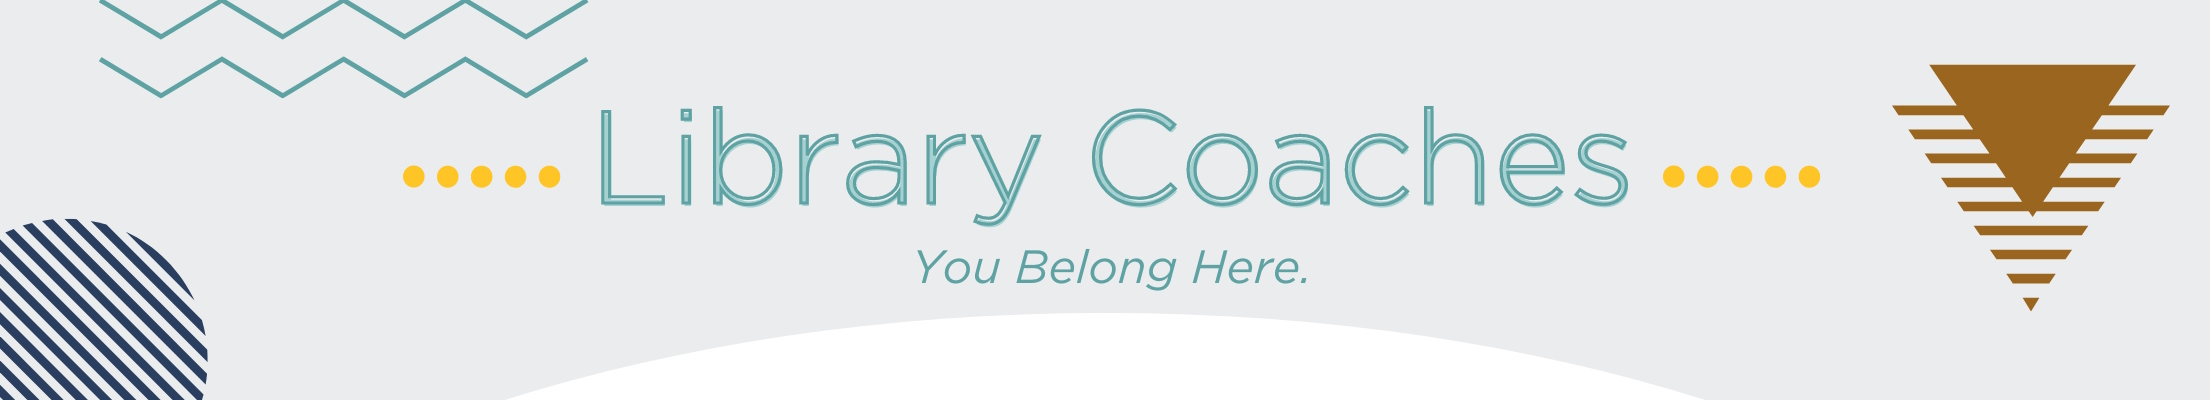 decorative image with text that reads "Library Coaches" and "You Belong Here"